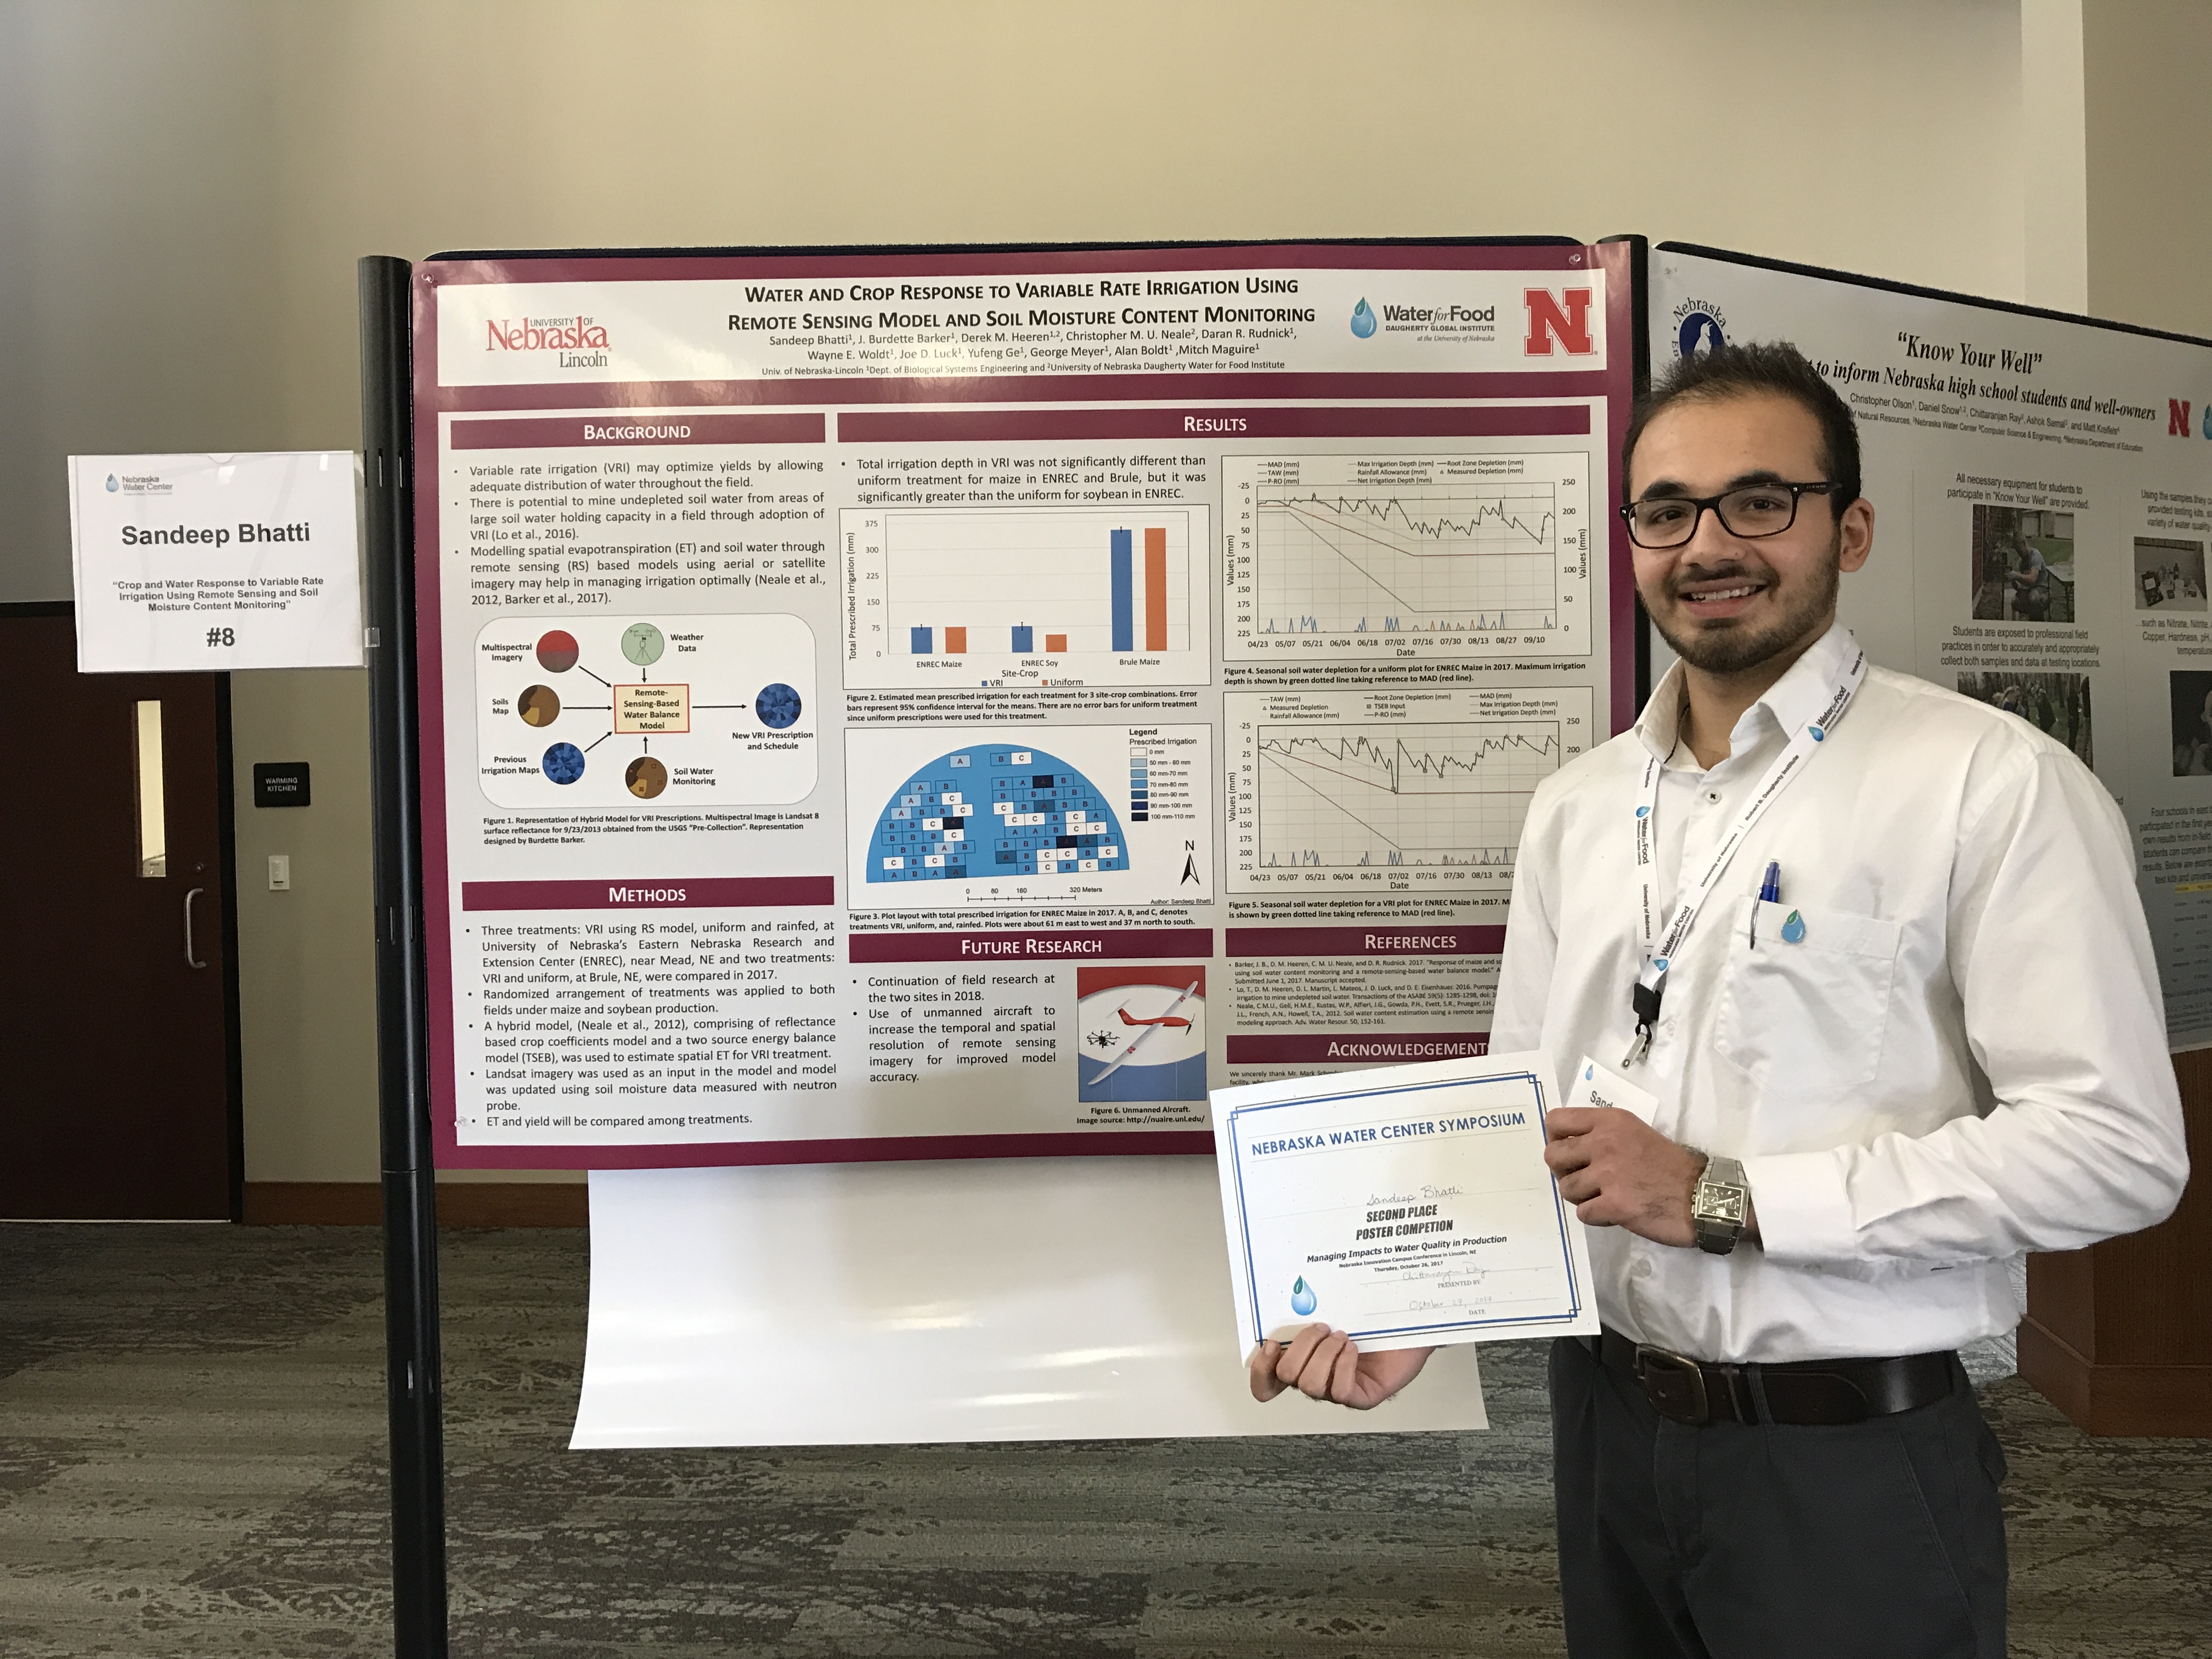 Sandeep Bhatti's poster on variable rate irrigation took second place in the competition at the Nebraska Water Center Symposium last week.